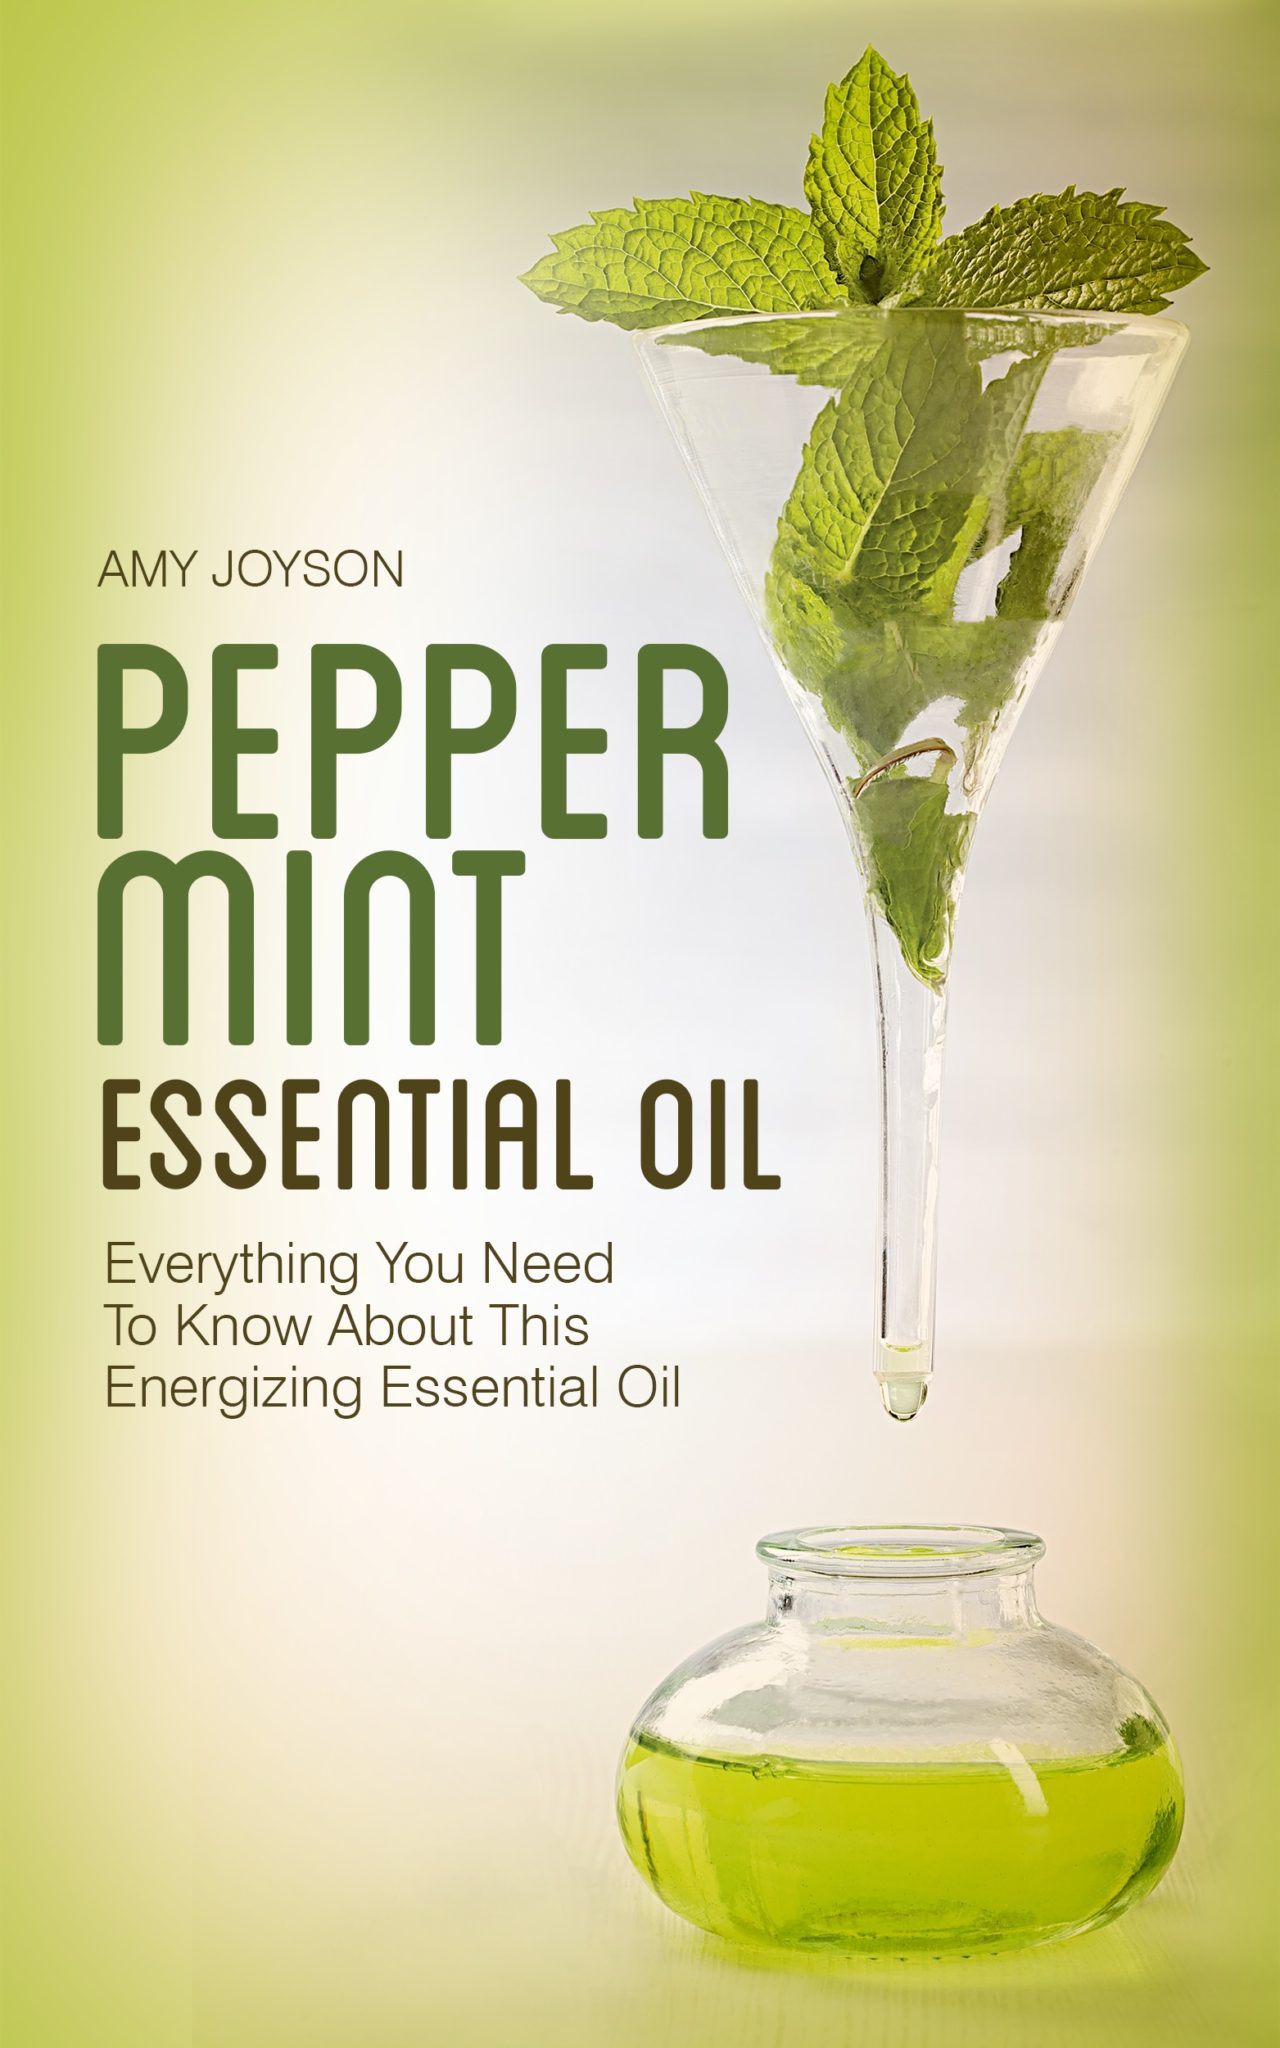 FREE: Peppermint Essential Oil: Everything You Need To Know About This Energizing Essential Oil by Amy Joyson